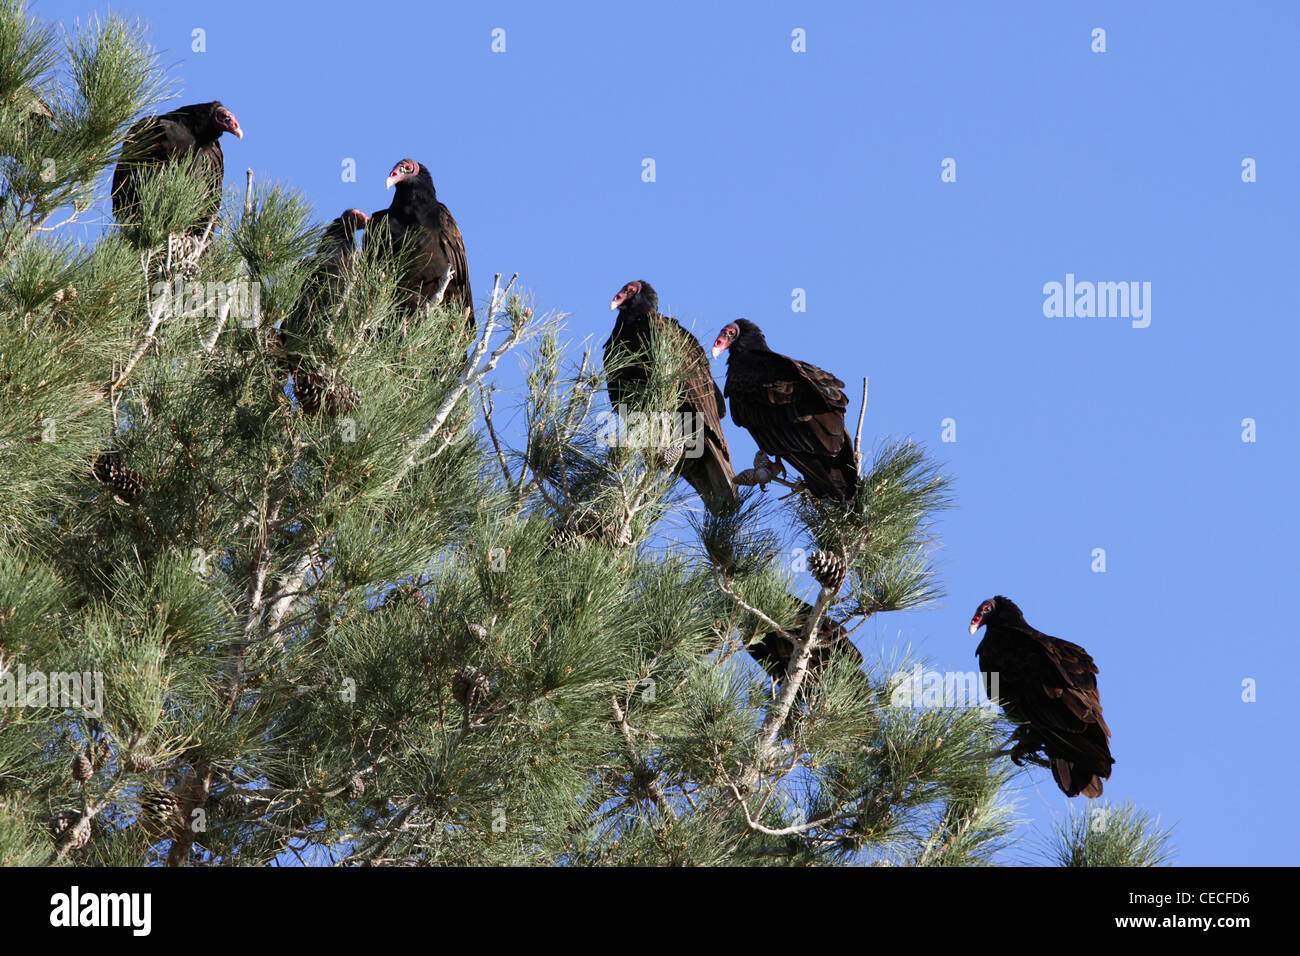 Turkey vultures (Cathartes aura), also called turkey buzzards, common bird of the United States. Stock Photo